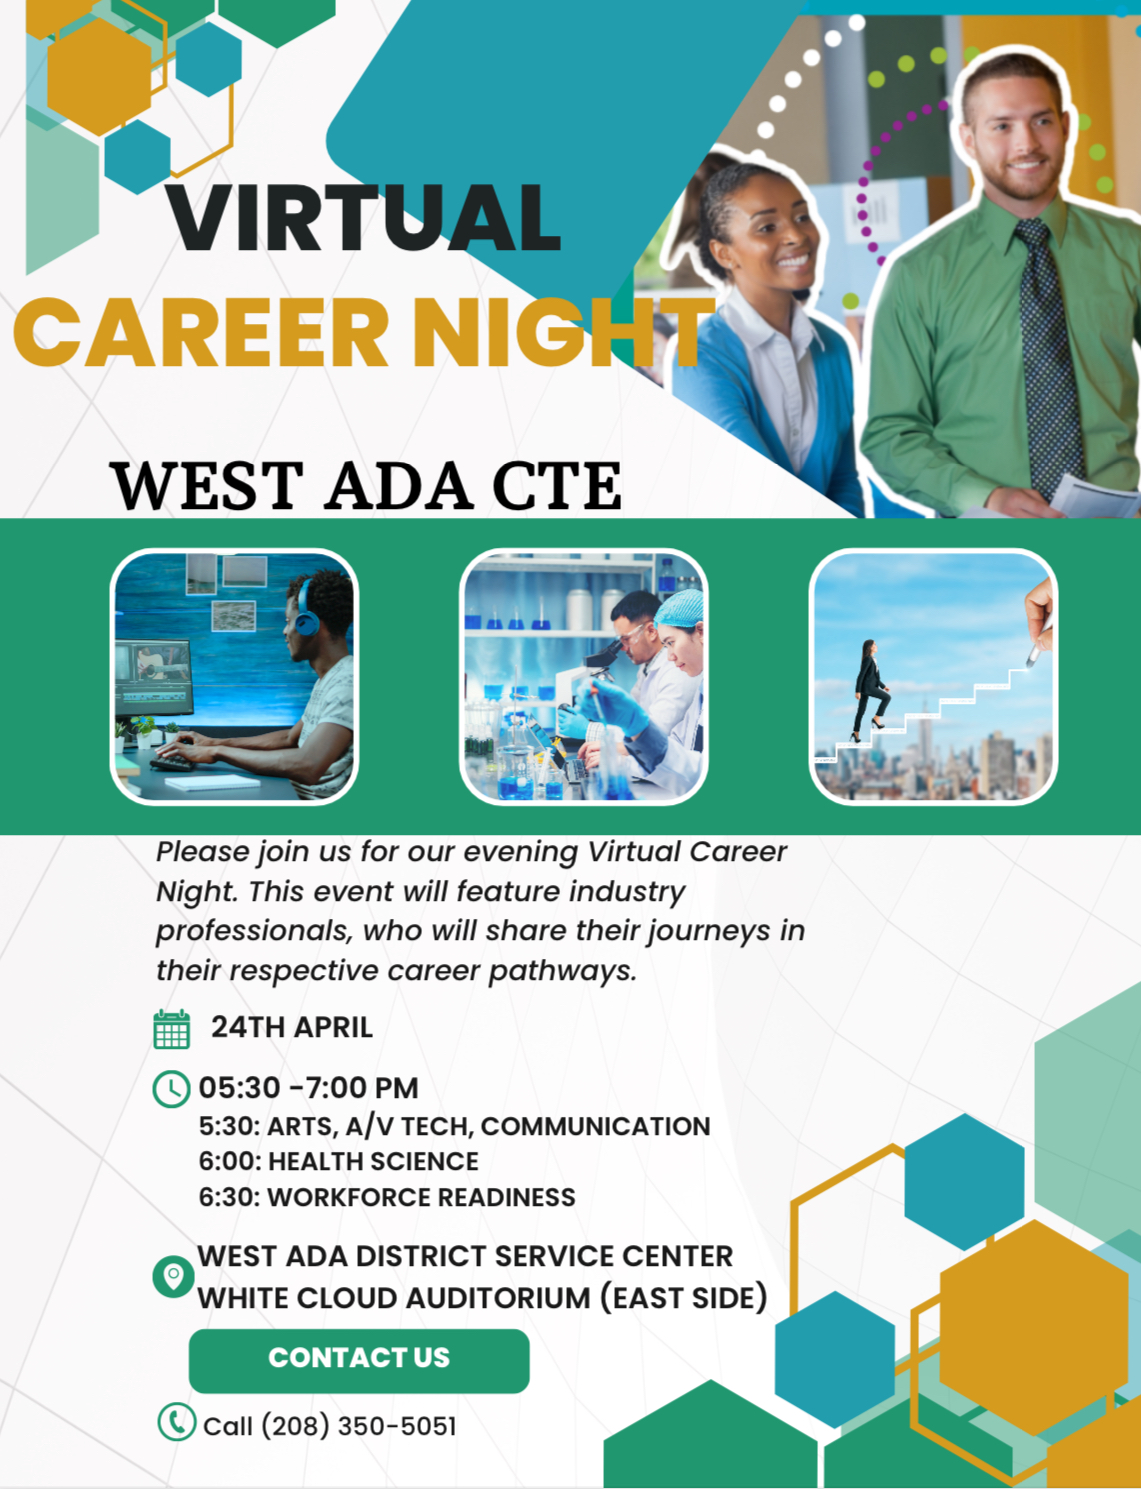 Virtual Career Night West Ada CTE with green and white patterns and pictures of young adults in a work setting. Text: "Please join us for our evening Virtual Career Night. This event will feature industry professionals, who will share their journeys in their respective career pathways.. 24th of April. 5:30 to 7:00 PM. 5:30: Arts, A/V Tech, Communication. 6:00: Health Science. 6:30: Workforce Readiness. West Ada District Service Center White Cloud Auditorium (East Side). Contact us by calling 208-350-5051